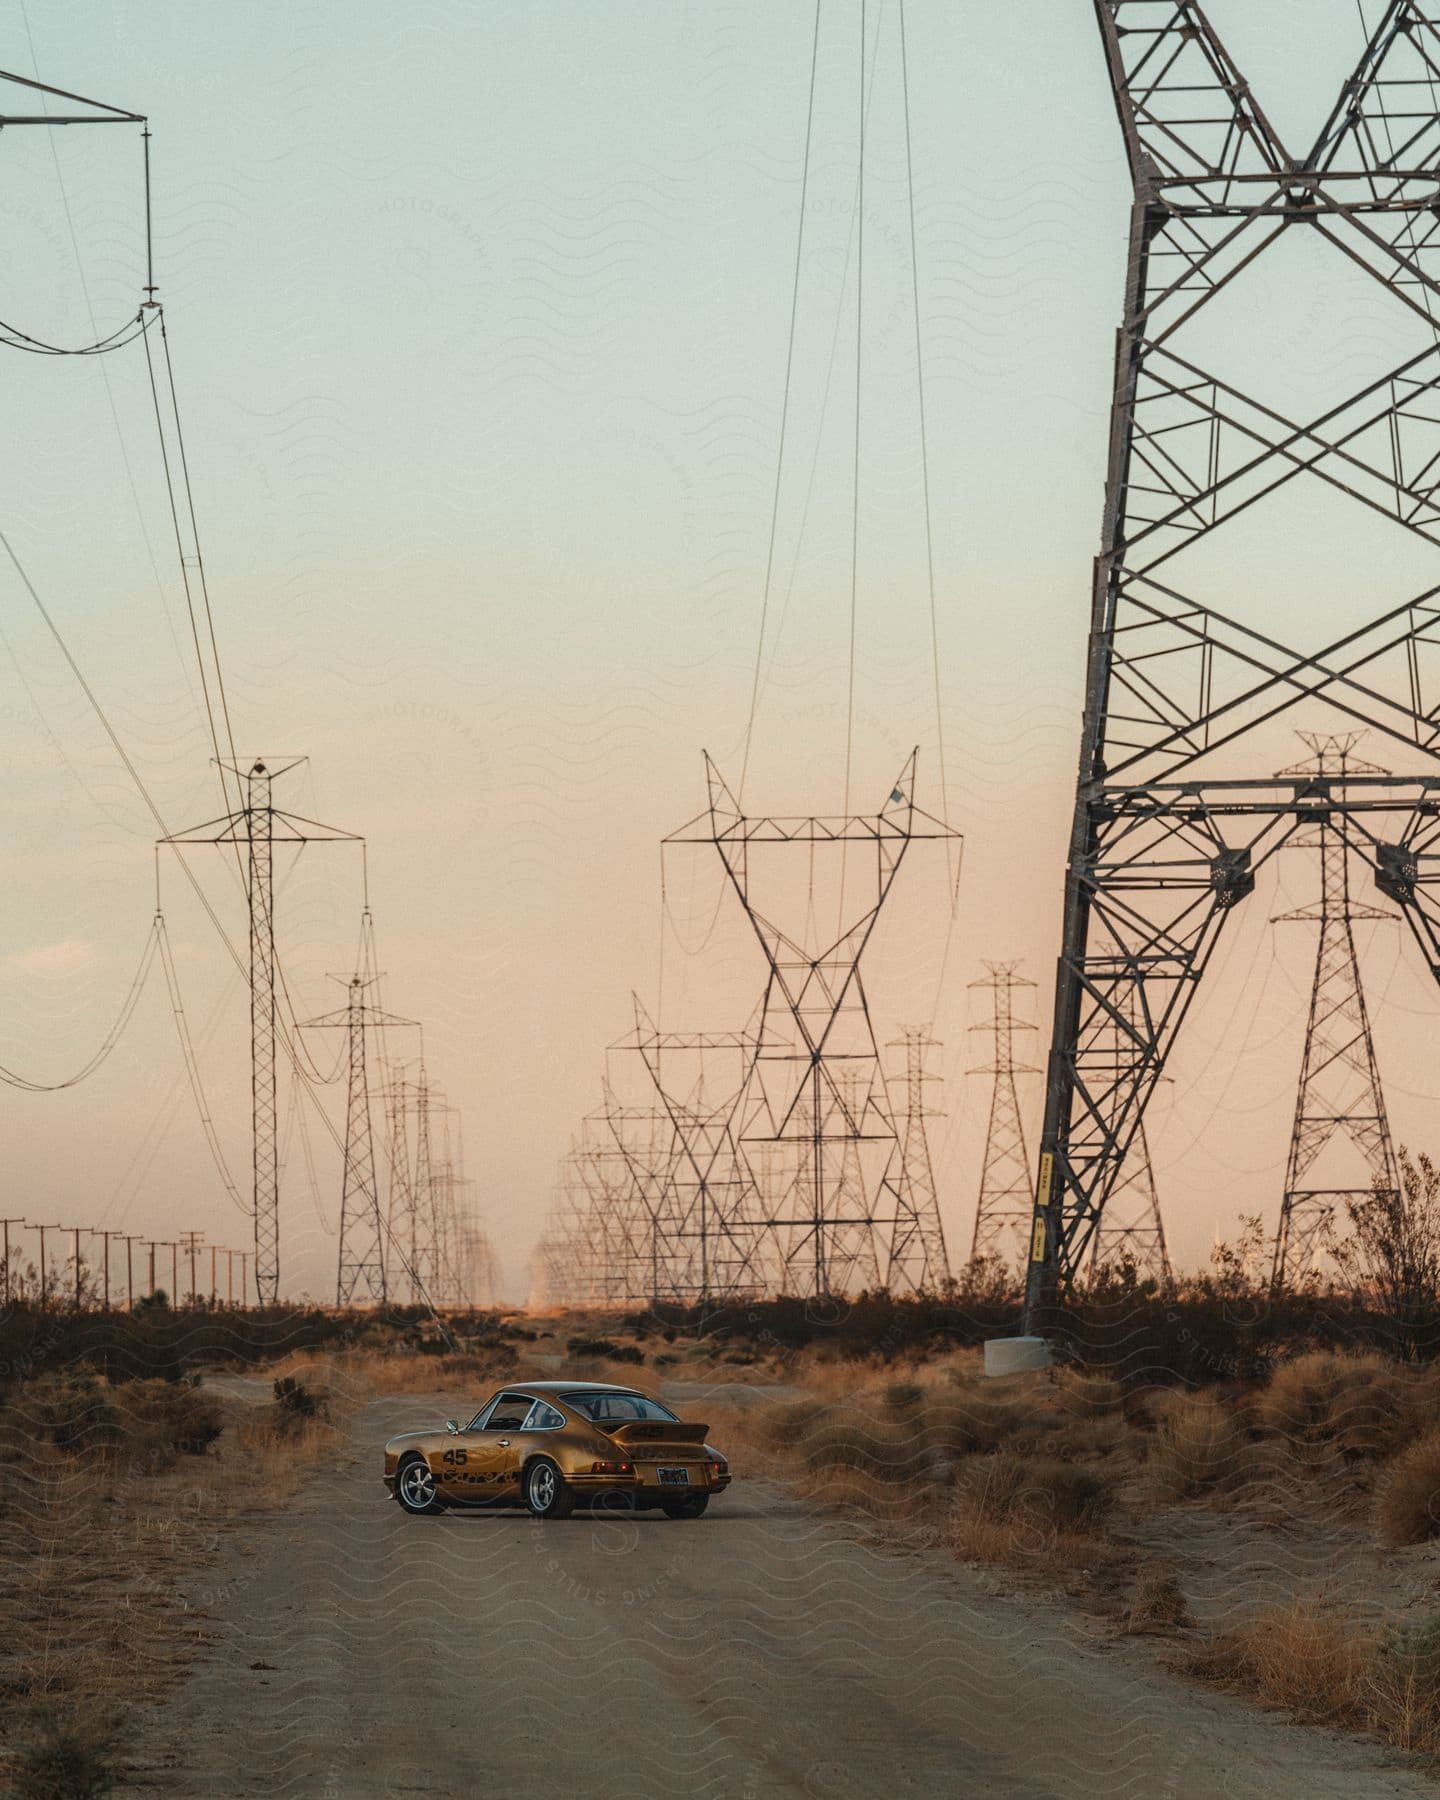 Vintage Porsche in the midst of electric power towers.